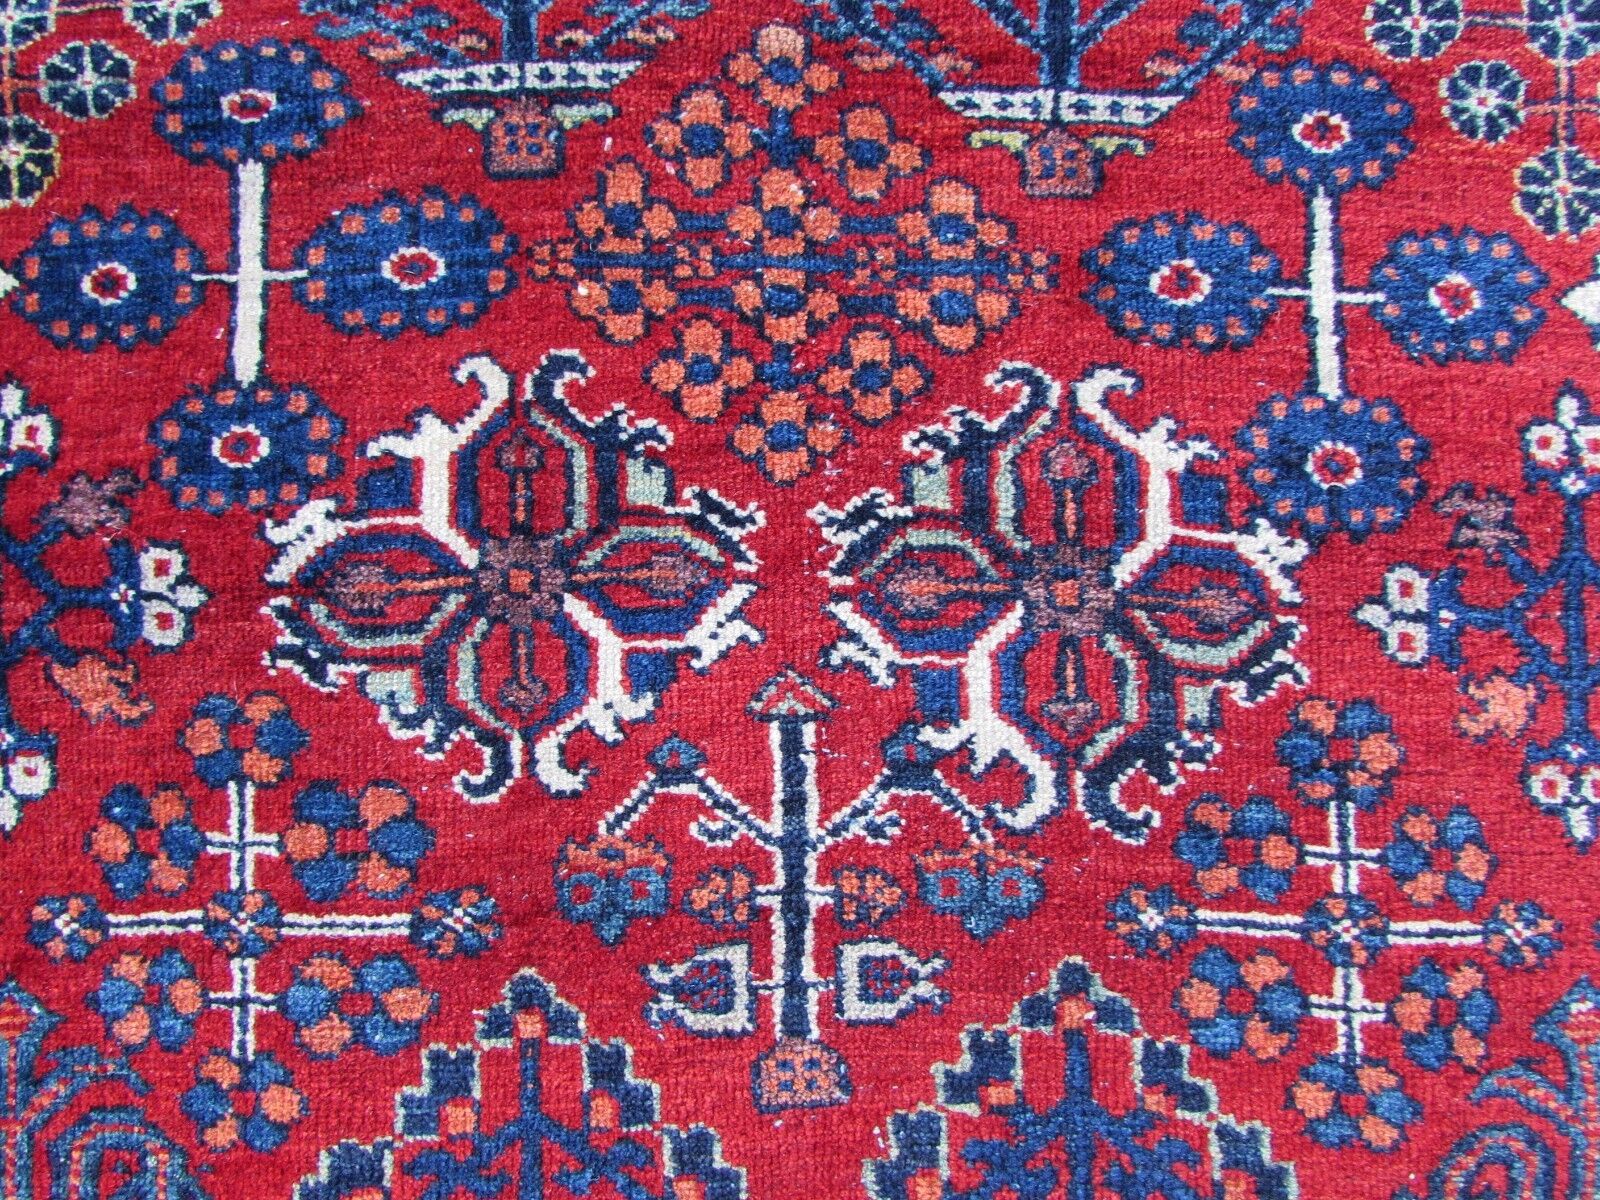 Handmade antique Persian Joshagan rug in bright red color. The rug is from the beginning of 20th century mostly in original good condition, it has some low pile